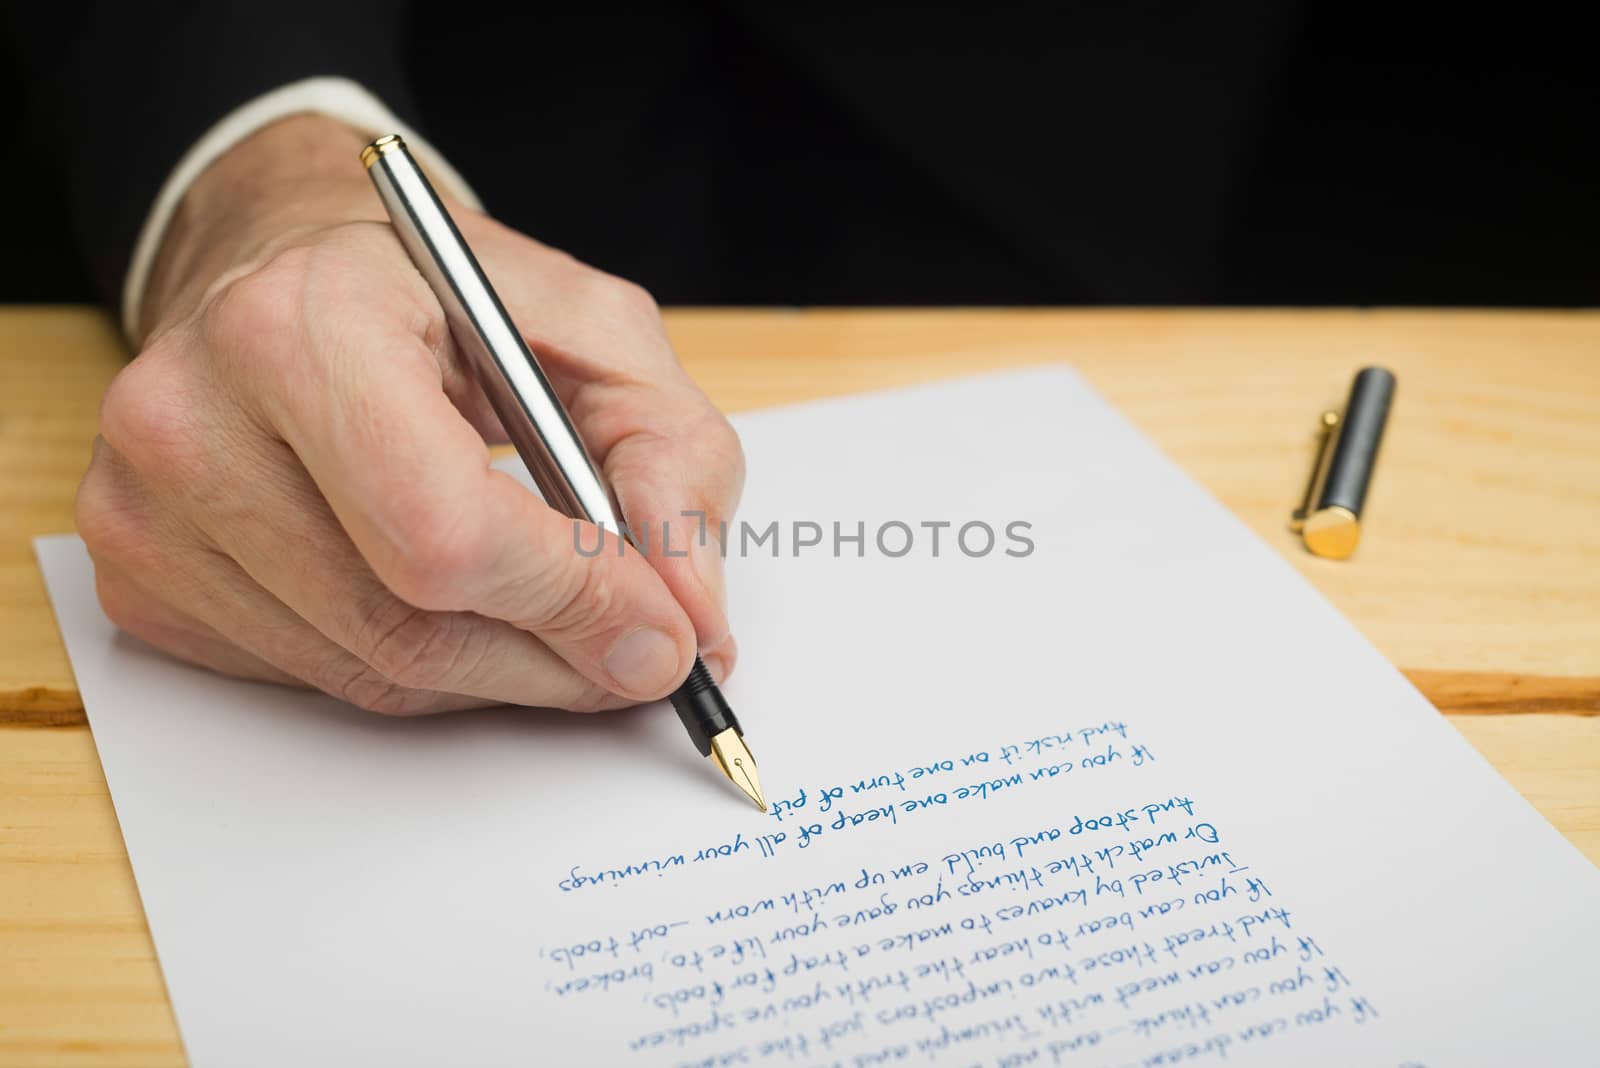 A businessman writing with a fountain pen on a white paper set on a wooded deck